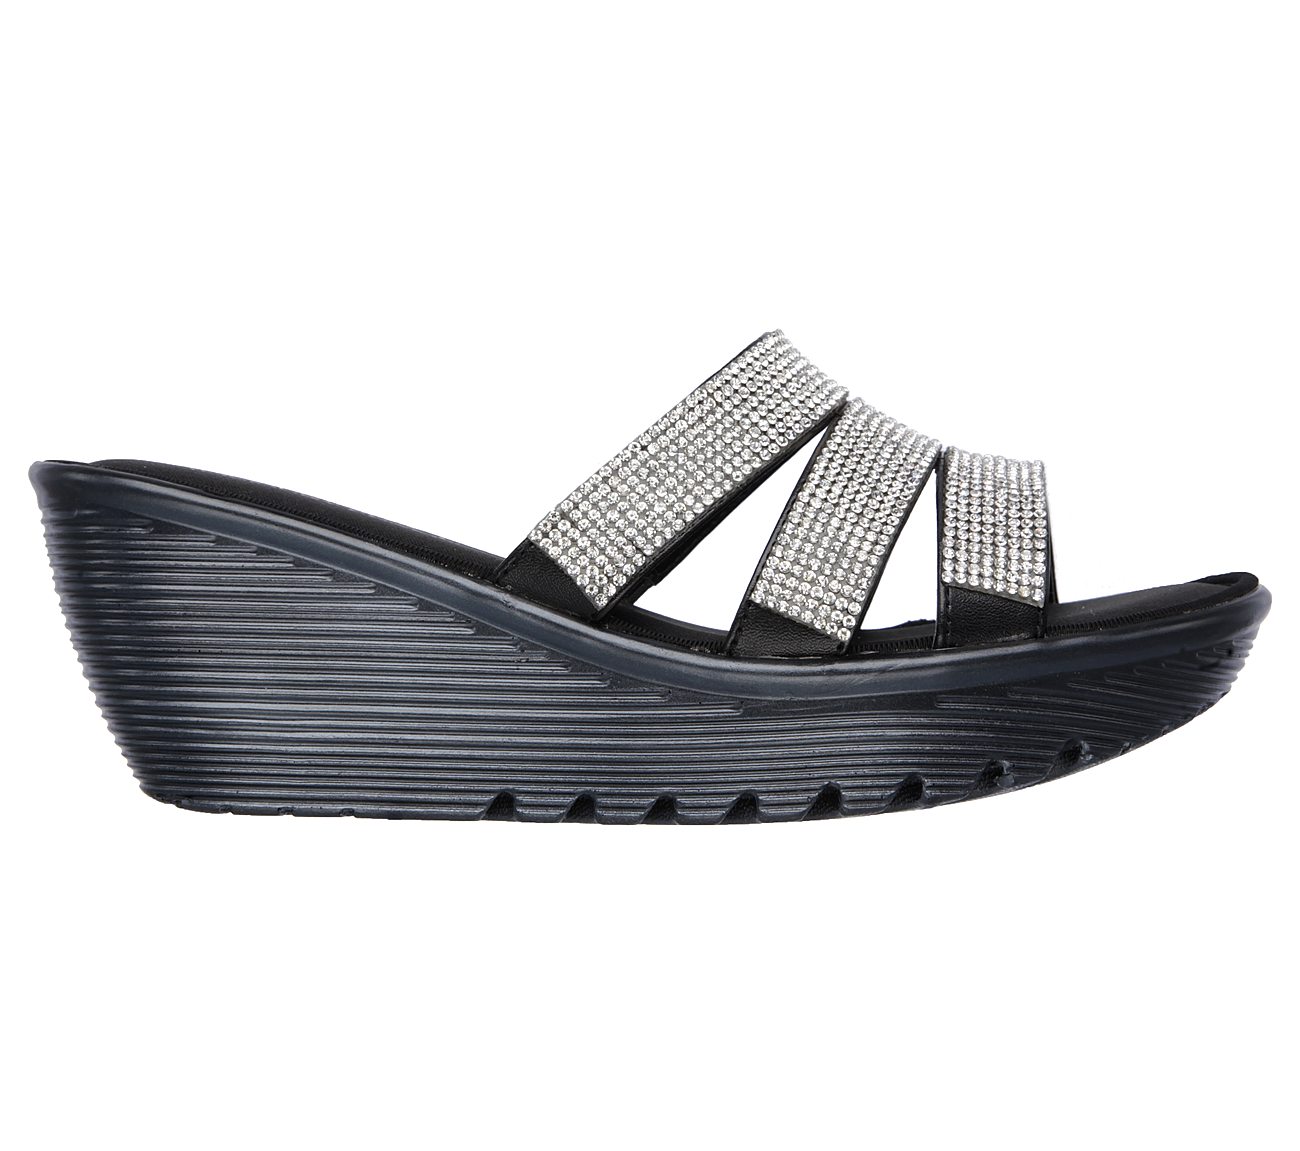 skechers sandals clearance